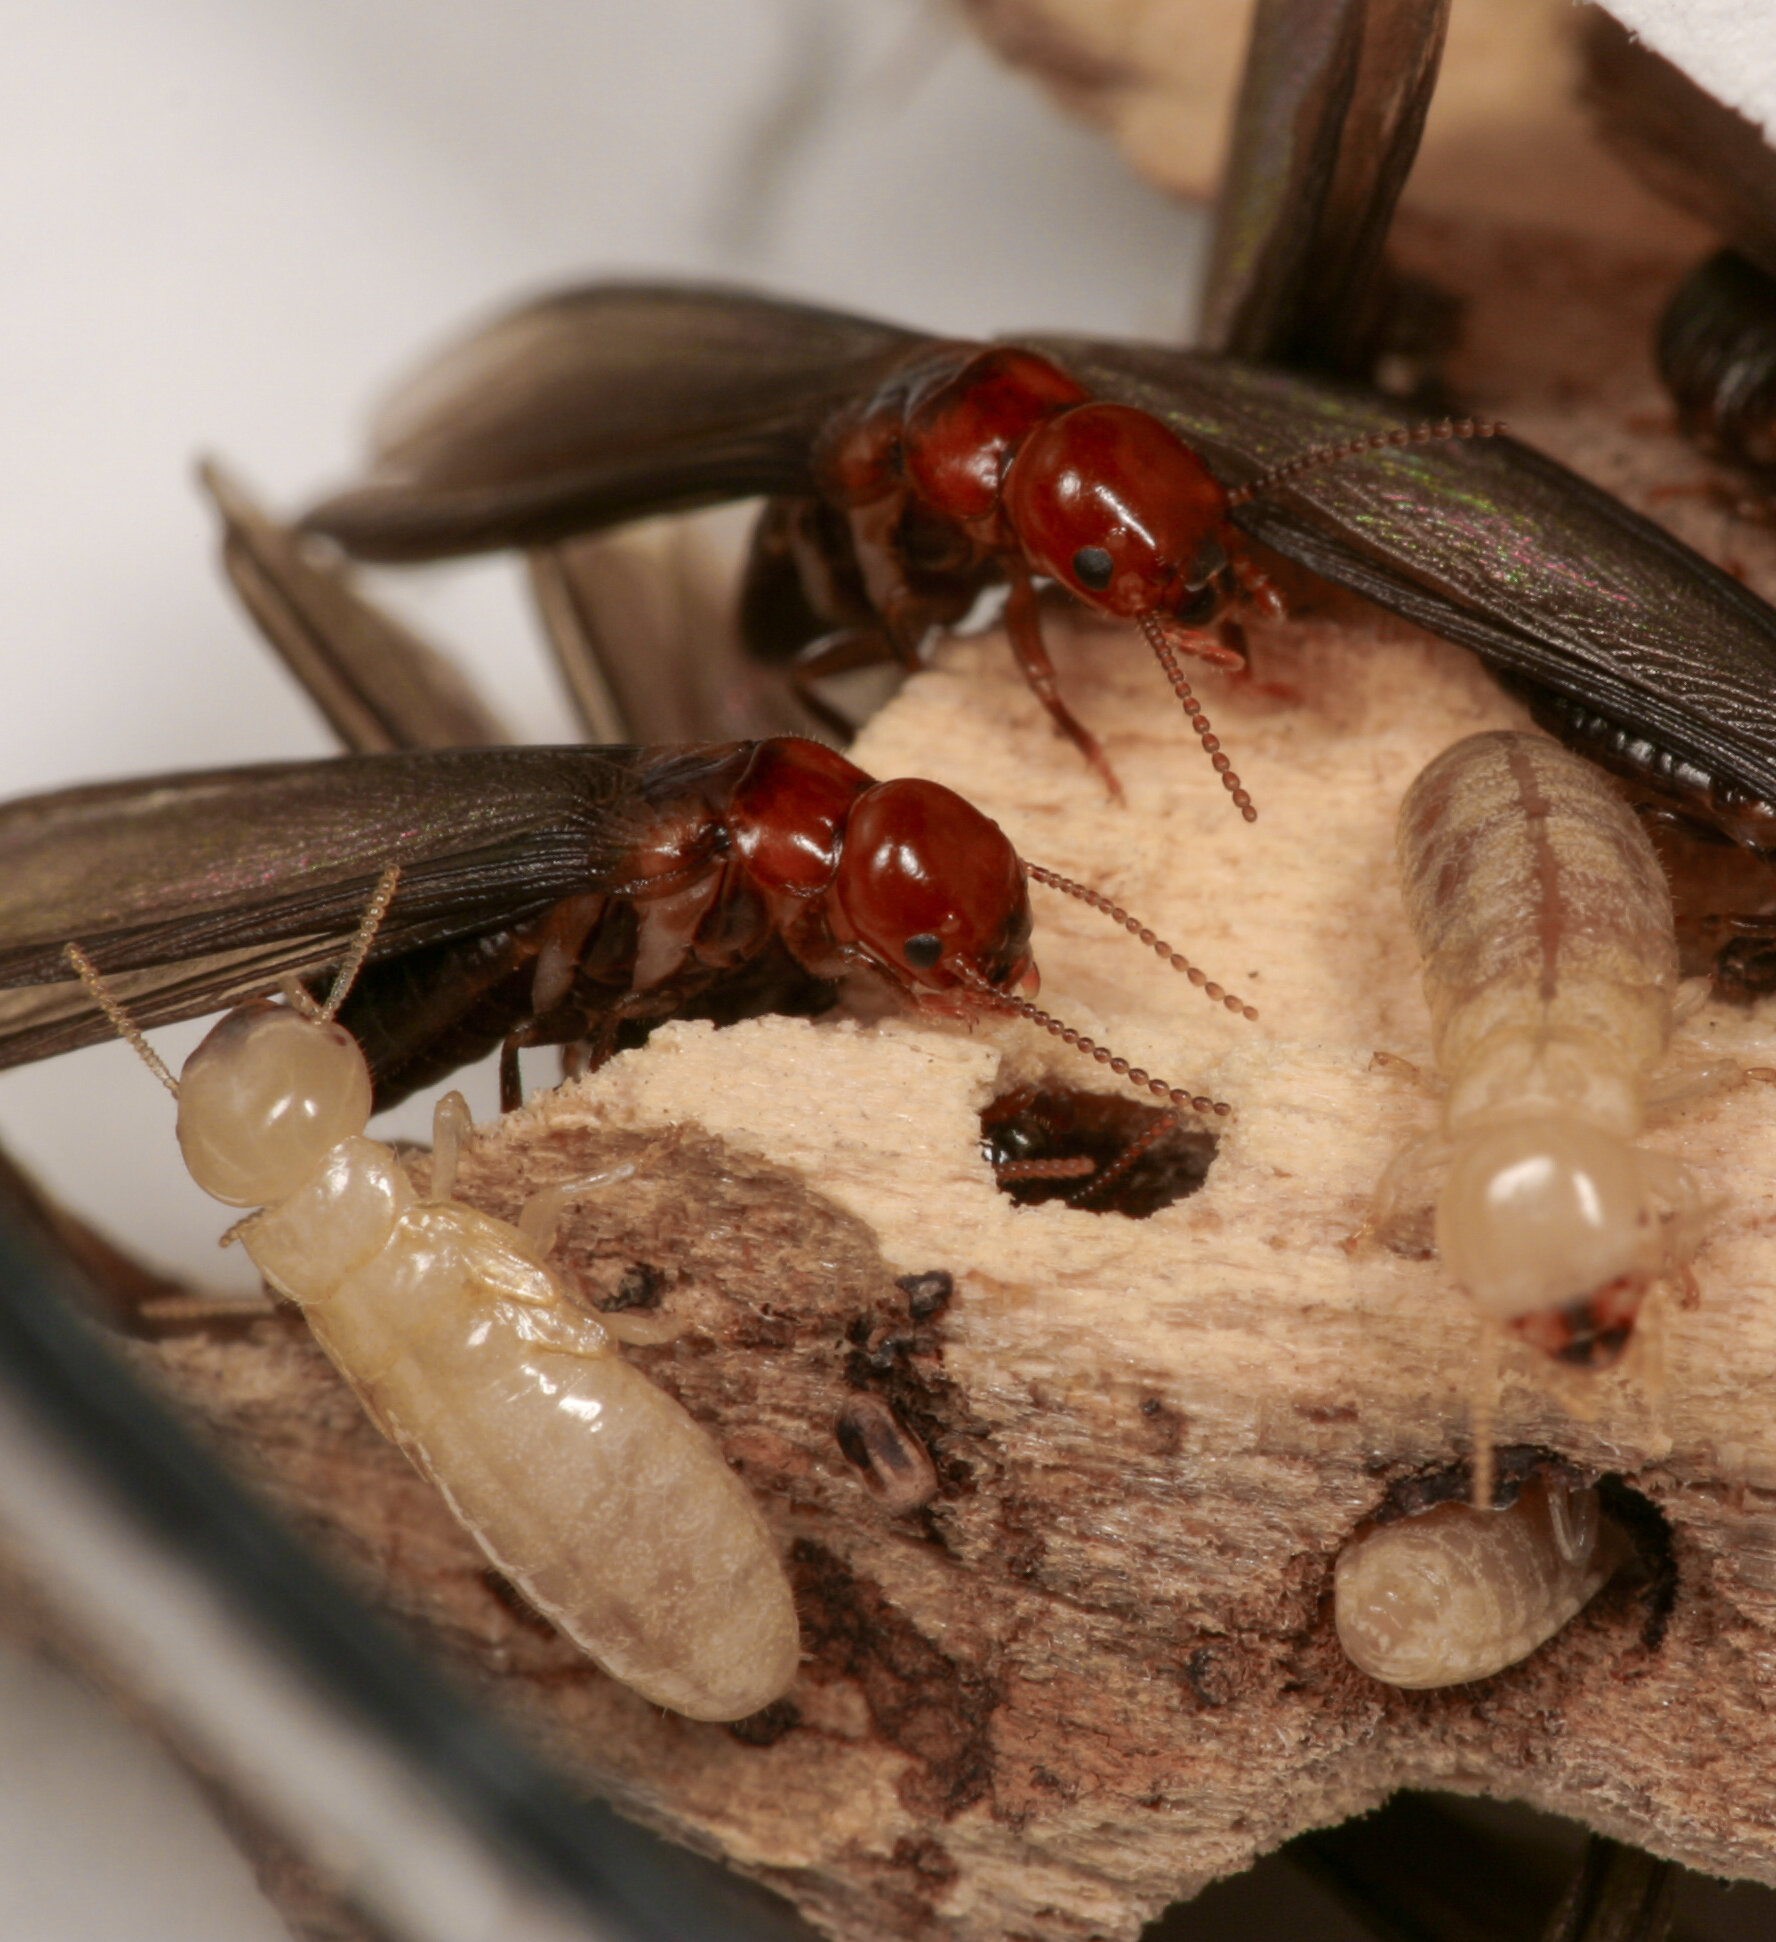 Greener, more effective termite control: Natural compound attracts wood eaters